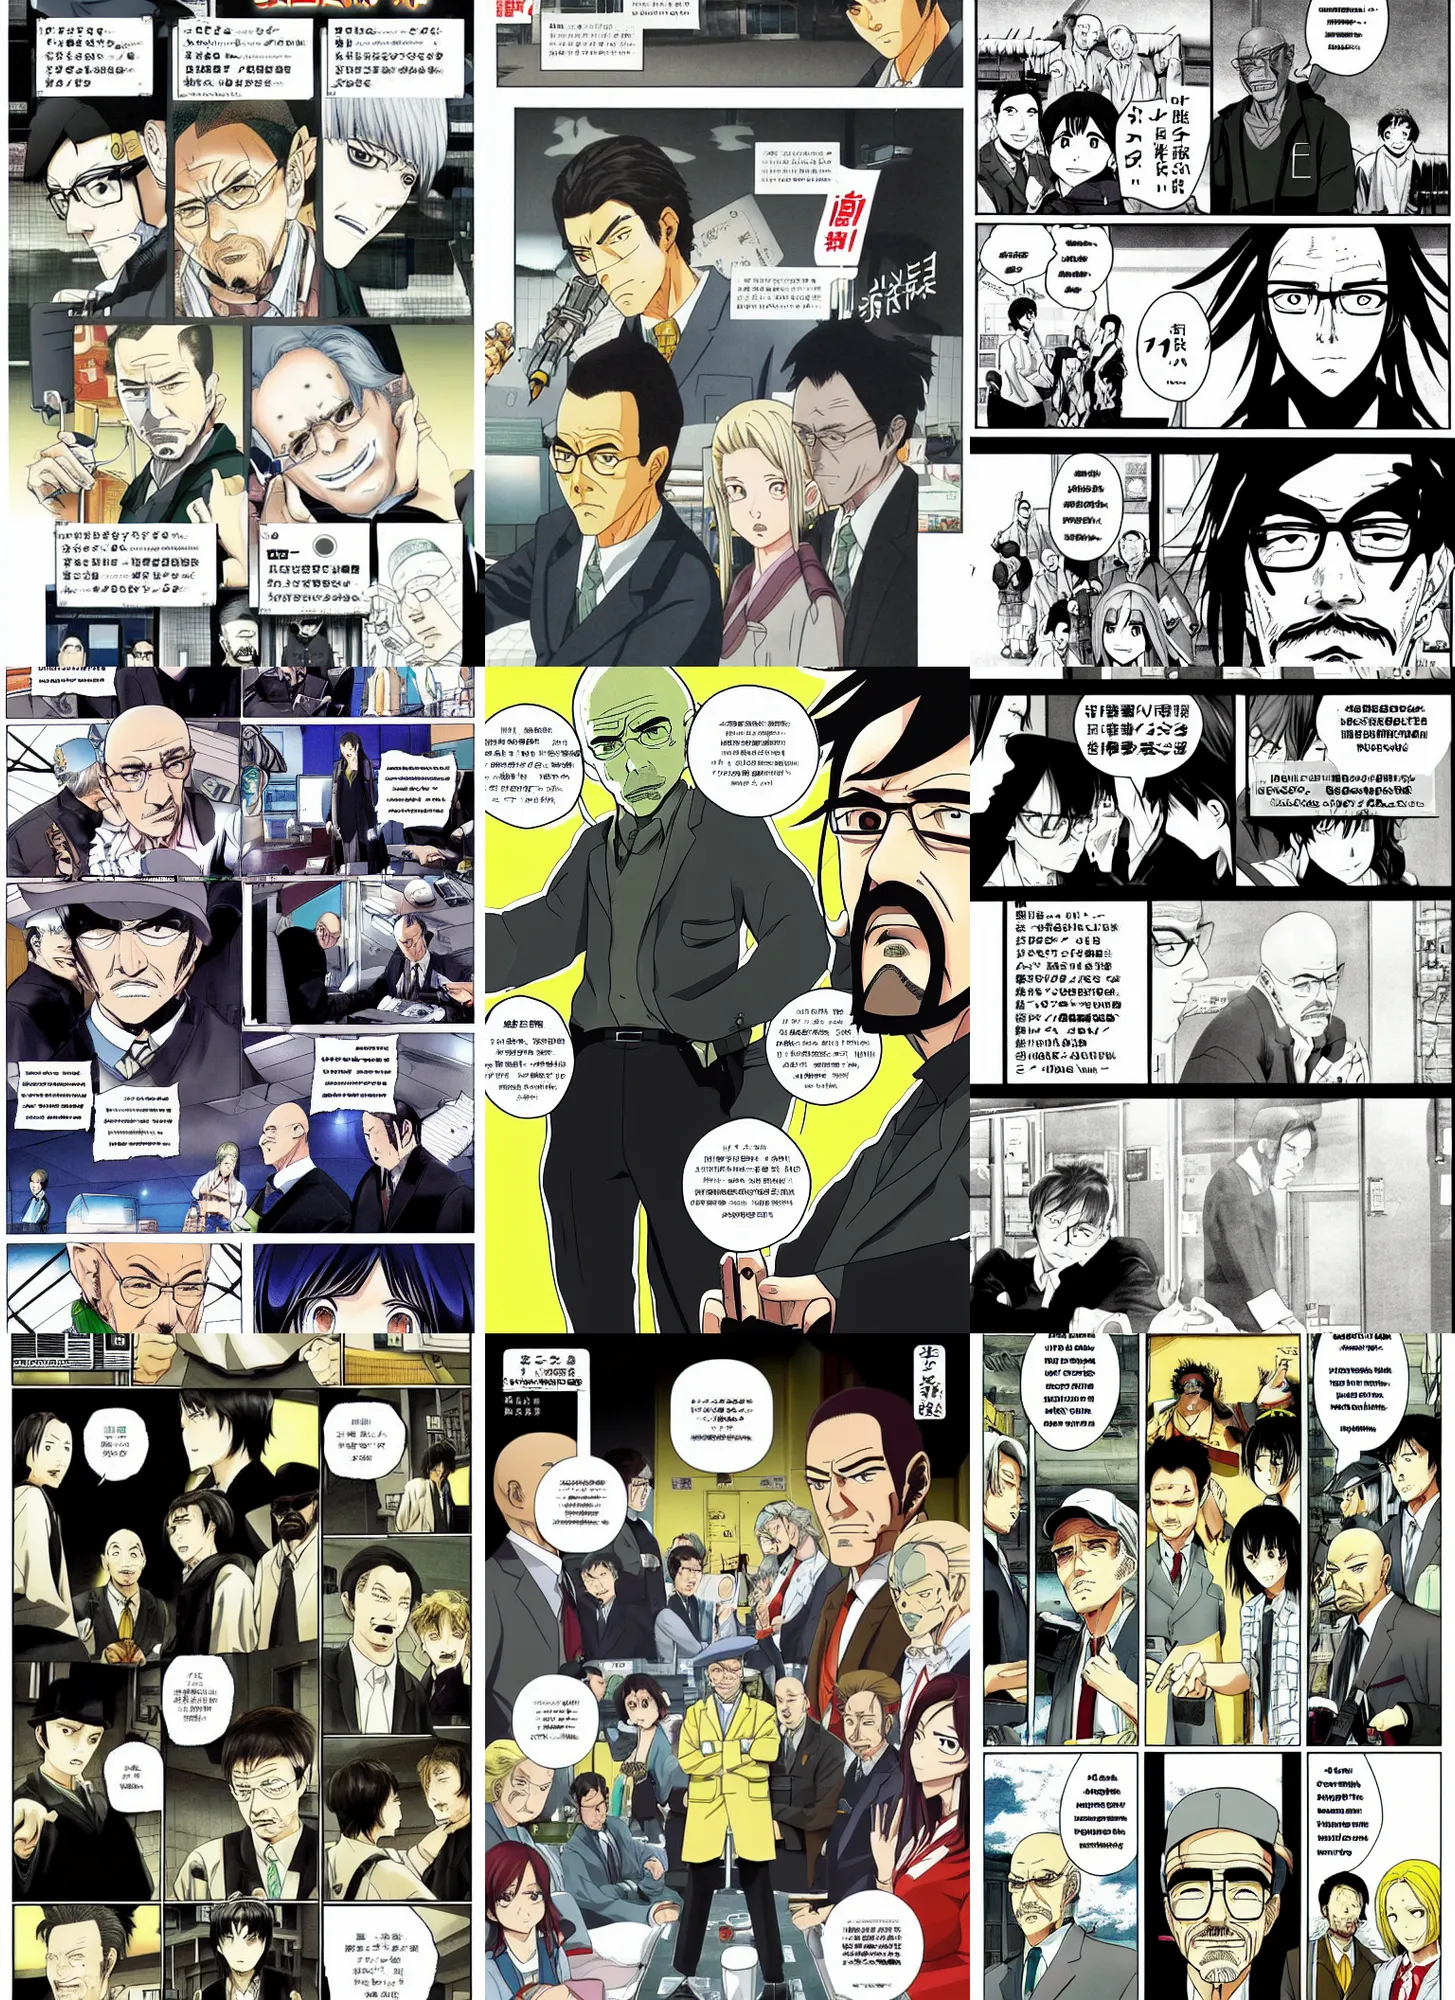 Prompt: full page of the manga adaptation of breaking bad season 5 episode 1 6, japanese text, full color